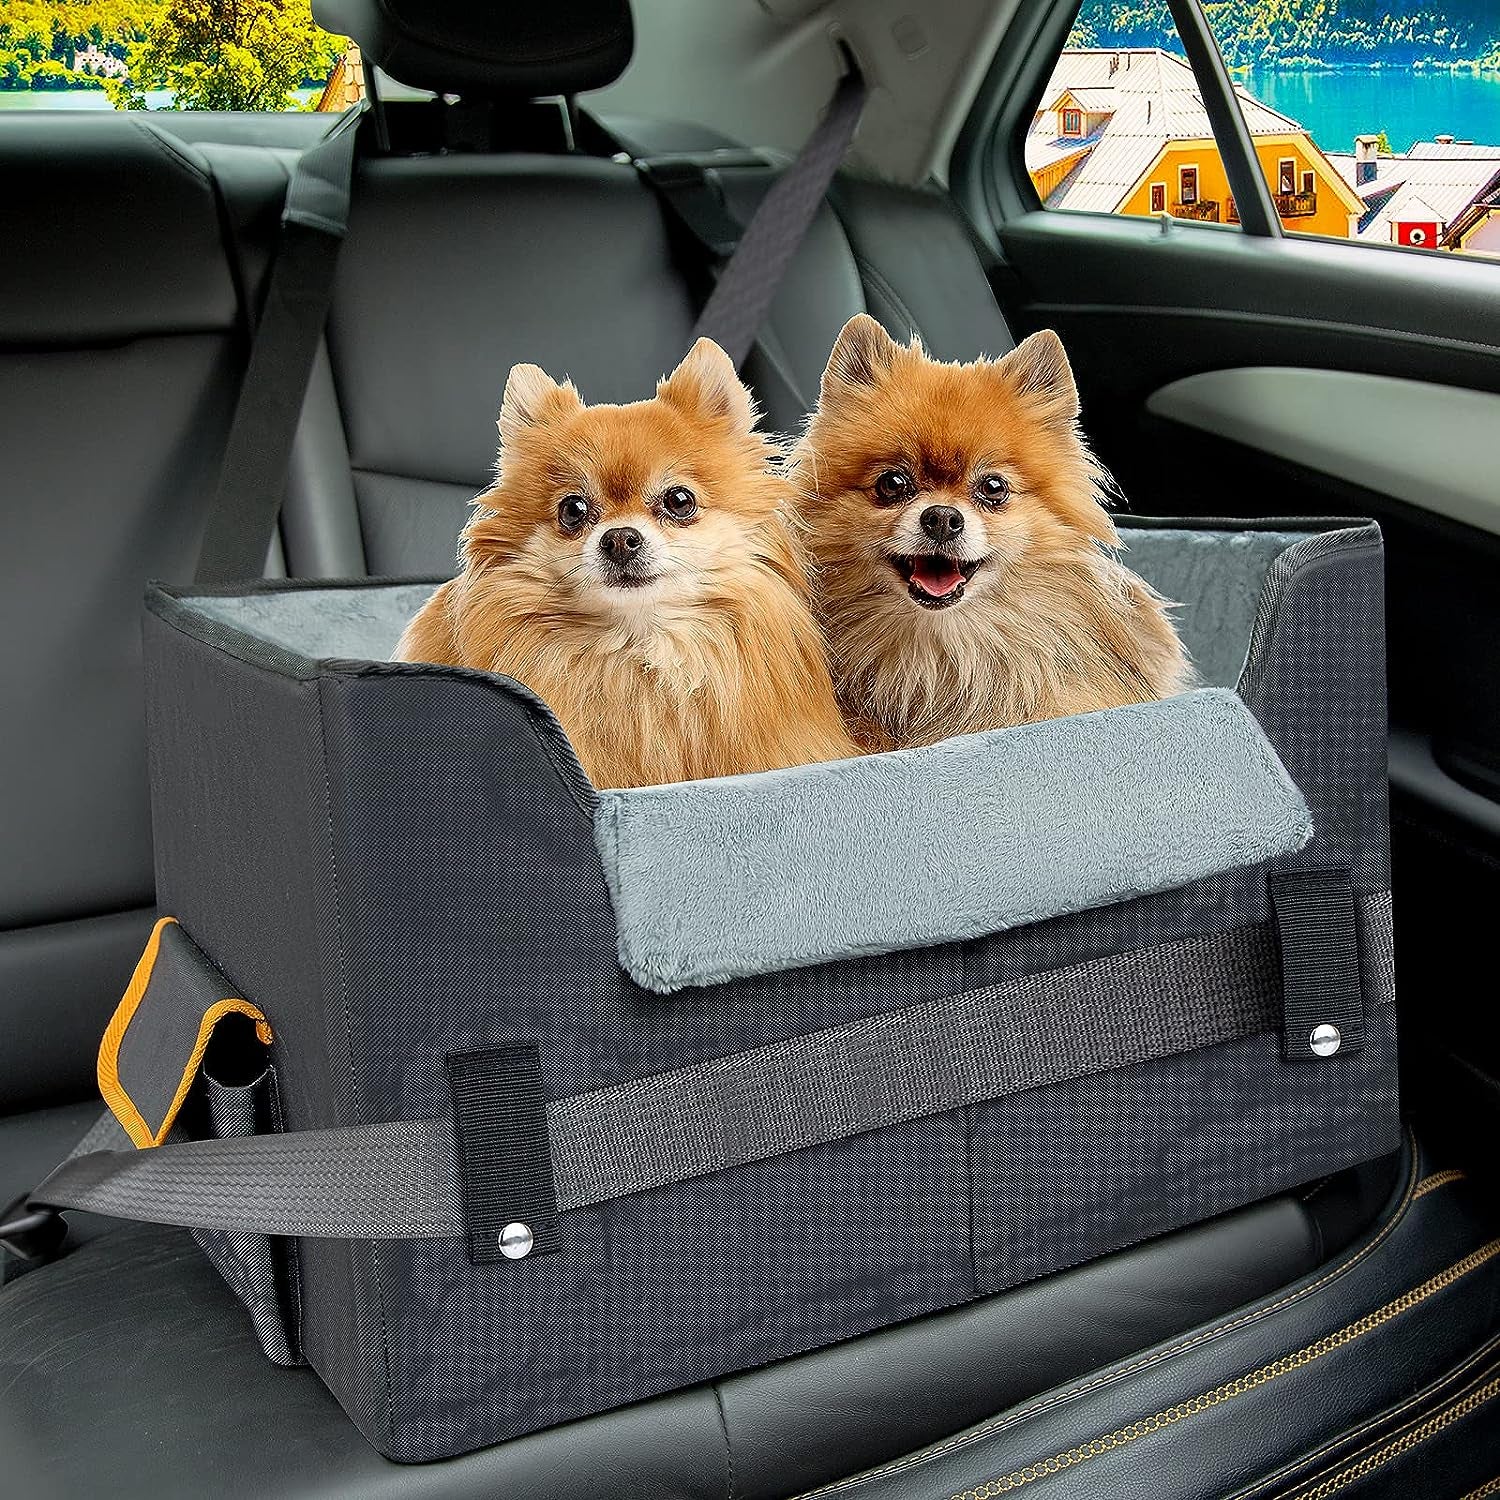 Dog Car Seat for Small Dogs, Elevated Dog Booster Seat Pet Travel Carrier Bed for Car with Adjustable Straps Pet Car Booster Seat for Small Dogs Cats